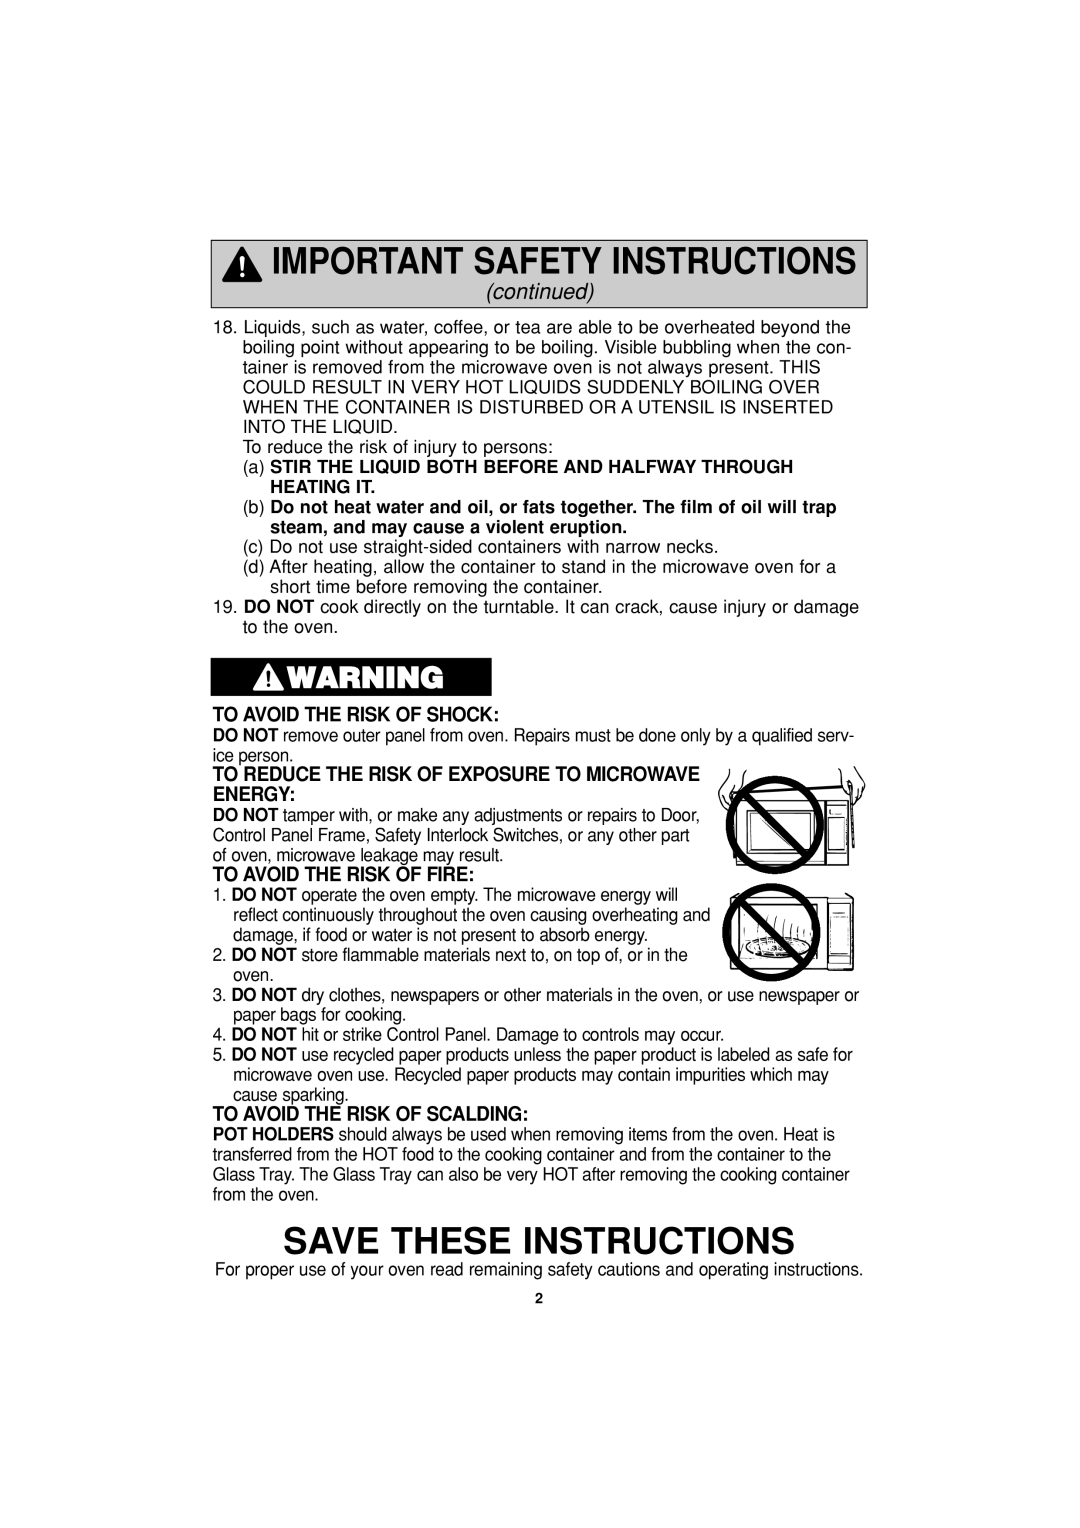 Panasonic NN-S334 Save These Instructions, continued, To Avoid The Risk Of Shock, Energy, To Avoid The Risk Of Fire 